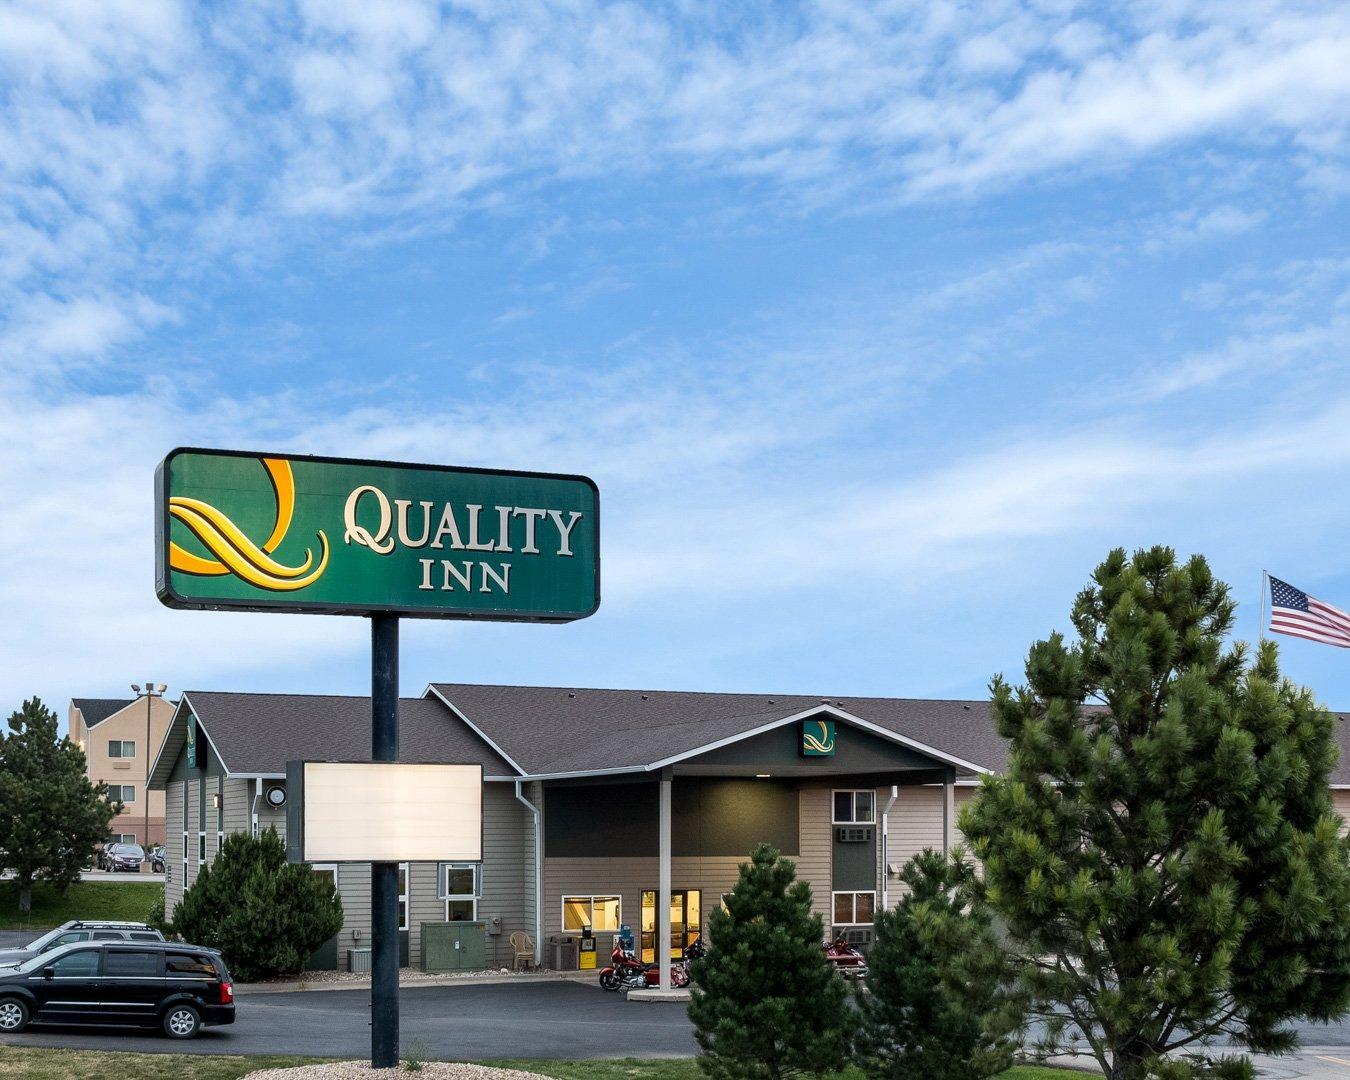 Quality Inn Coupons near me in Spearfish | 8coupons